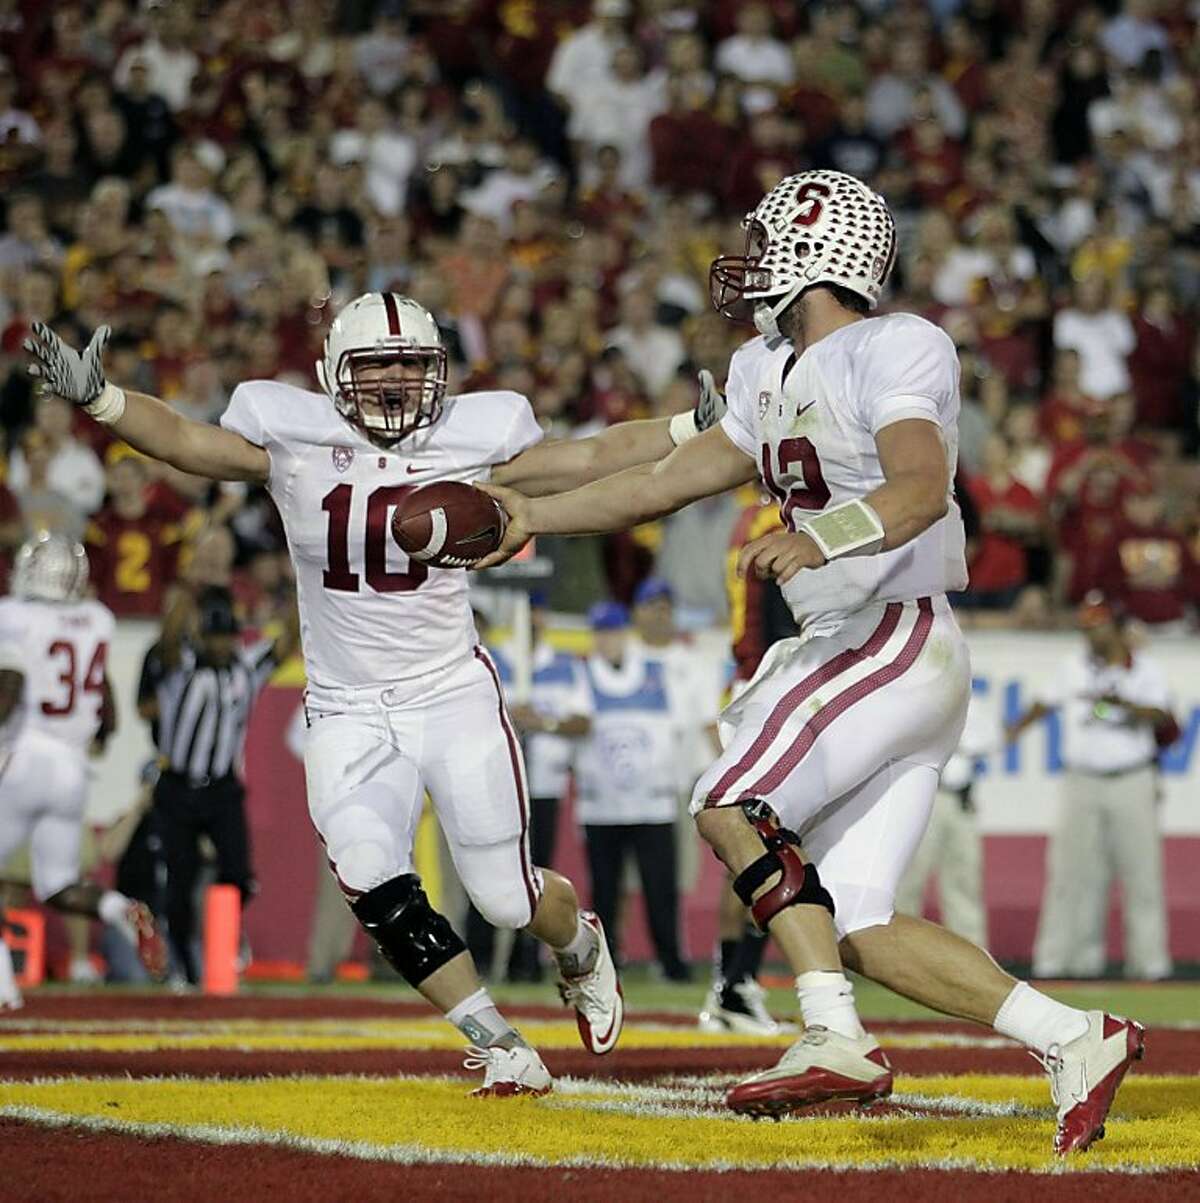 Stanford quarterback Andrew Luck, center, and fullback Geoff Meinken (10) celebrate after Luck scored a touchdown during the second half of an NCAA college football game in Los Angeles, Saturday, Oct. 29, 2011. Stanford won 56-48 in overtime. (AP Photo/Jae C. Hong) Ran on: 10-30-2011 Andrew Luck had his tough moments, but he ran for a touchdown in the second half and threw for three in the triple-overtime win against USC. Ran on: 10-30-2011 Andrew Luck had his tough moments, but he ran for a touchdown in the second half and threw for three in the triple-overtime win against USC. Ran on: 10-30-2011 Andrew Luck had his tough moments, but he ran for a touchdown in the second half and threw for three in the triple-overtime win against USC. Ran on: 10-30-2011 Andrew Luck had his tough moments, but he ran for a touchdown in the second half and threw for three in the triple-overtime win against USC.